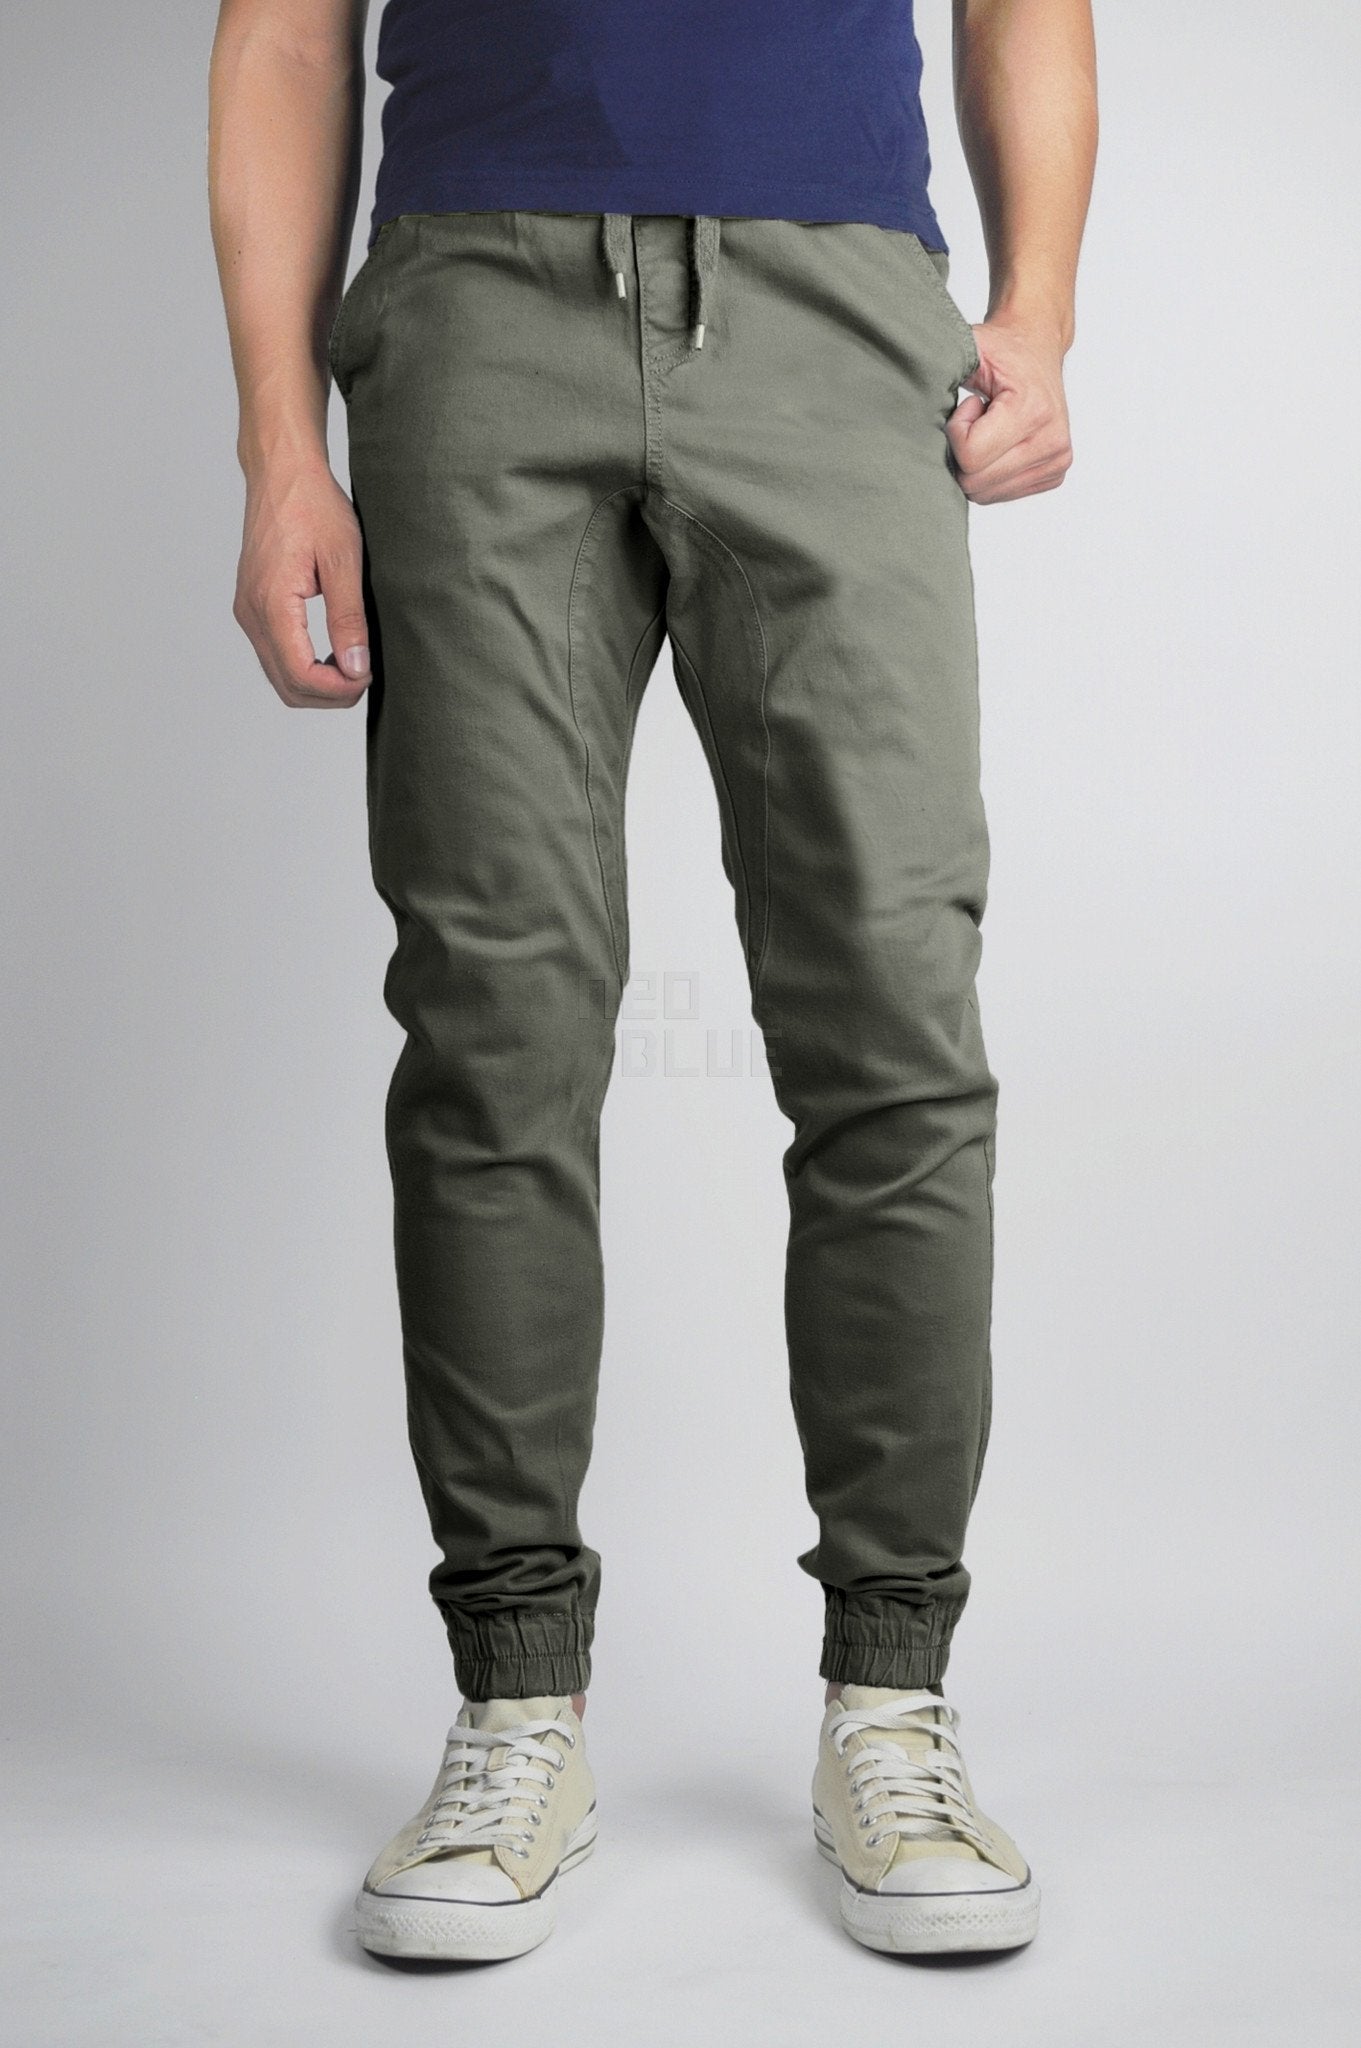 Neo Blue Jeans Army Green Jogger Pants